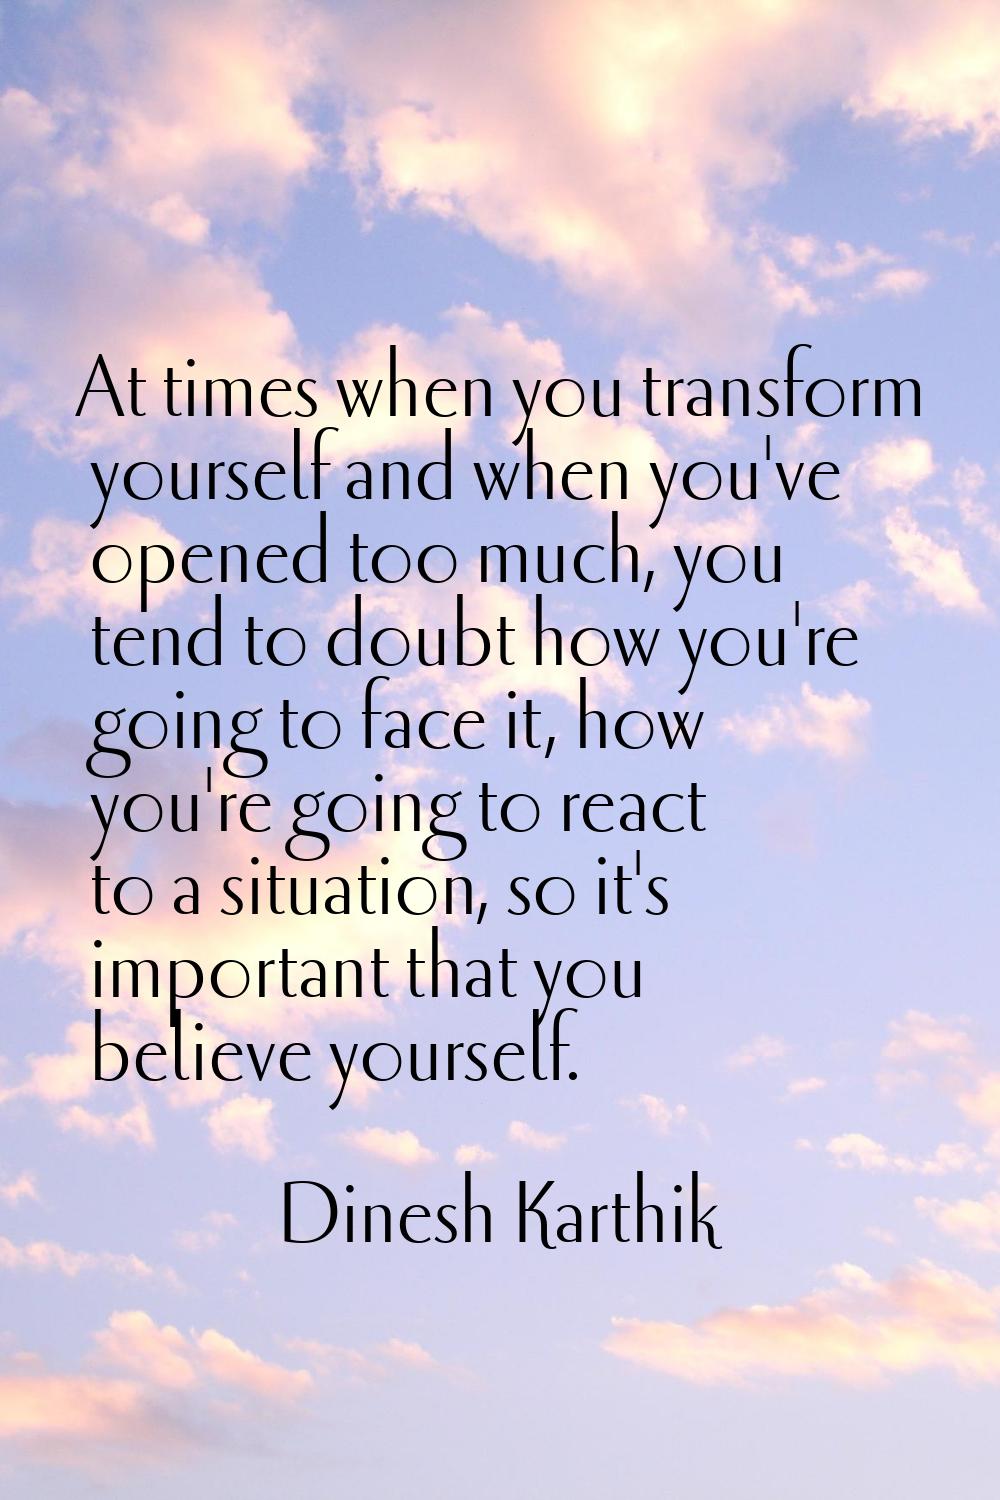 At times when you transform yourself and when you've opened too much, you tend to doubt how you're 